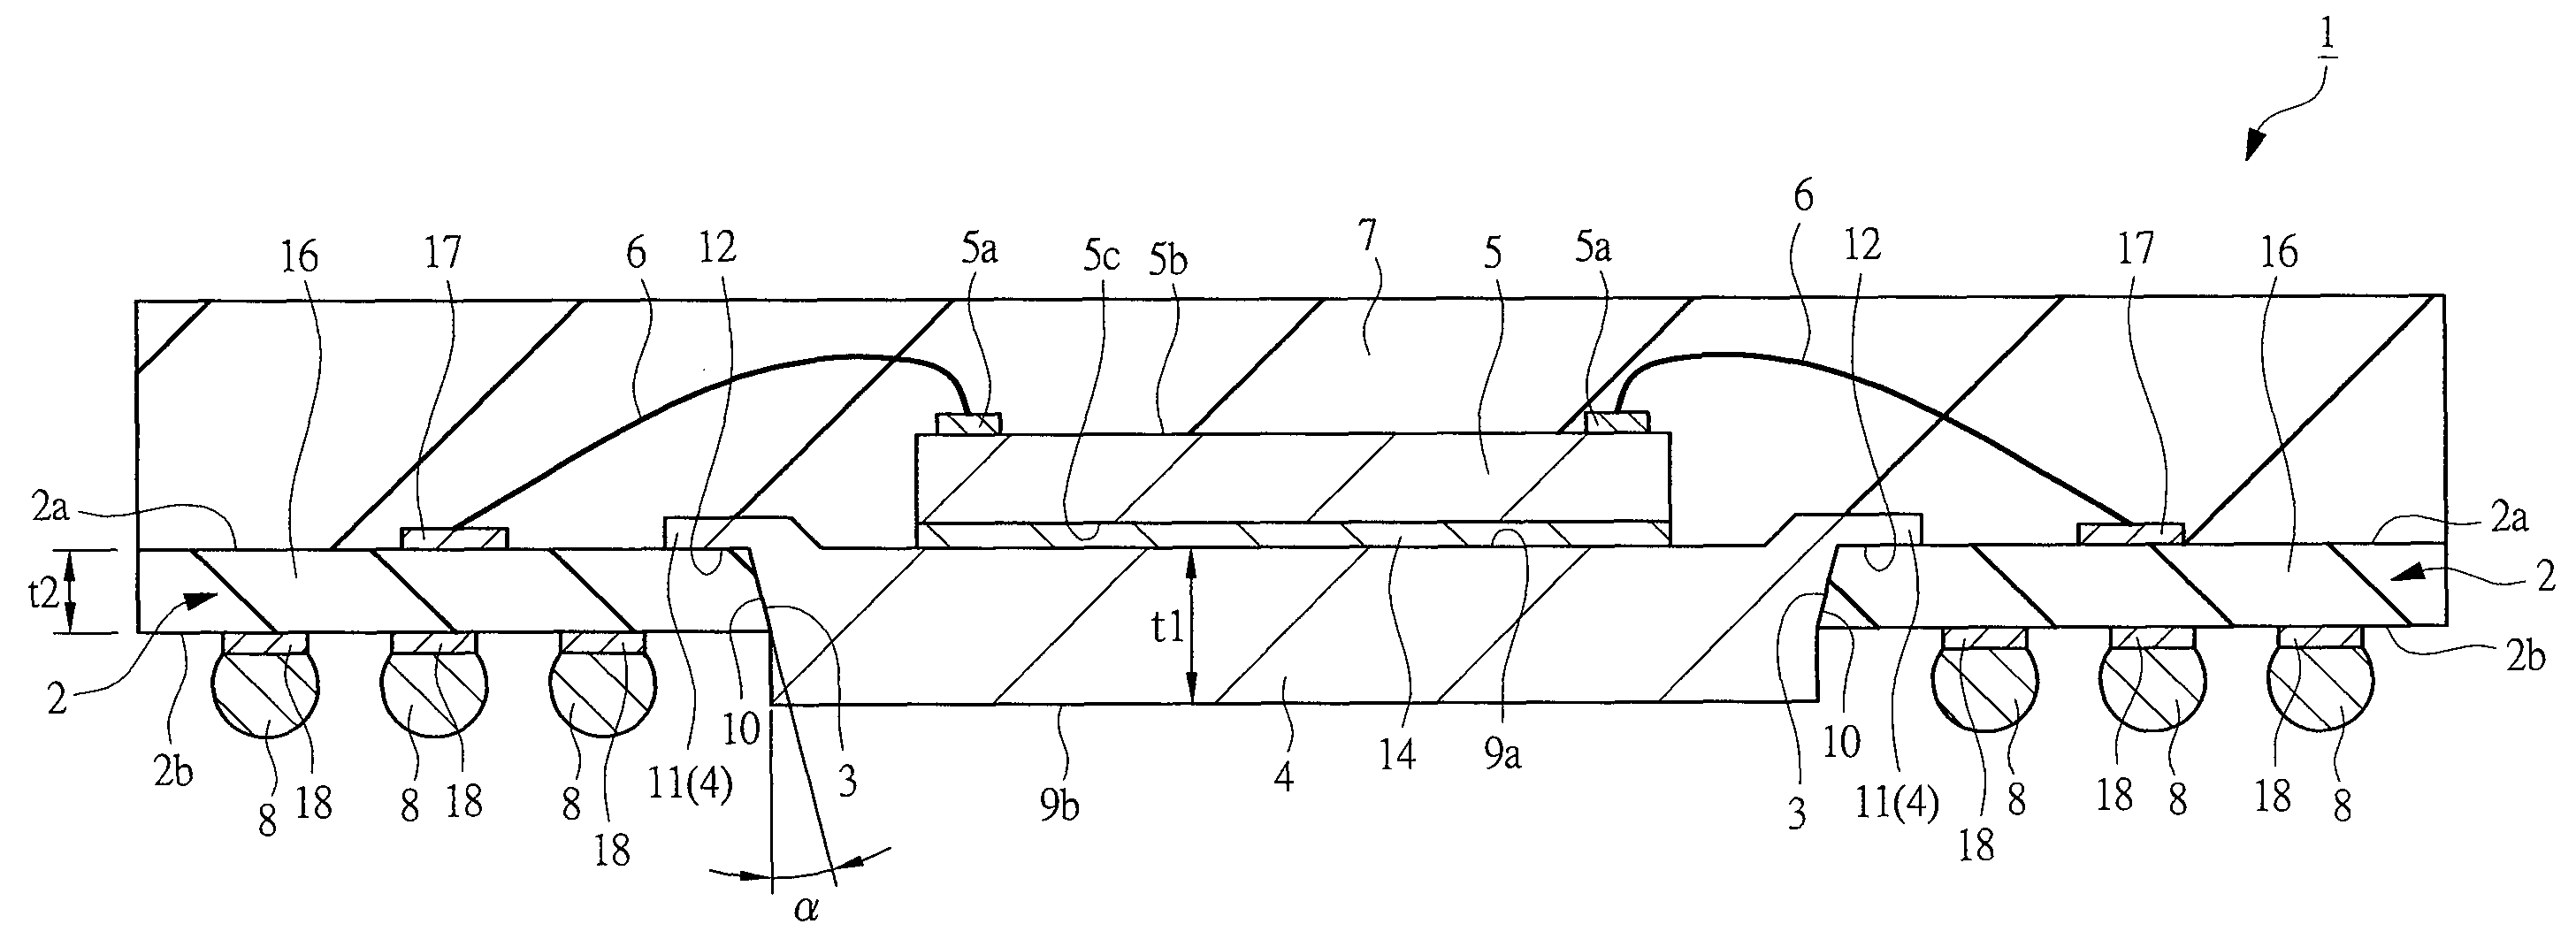 Semiconductor device mounted on heat sink having protruded periphery